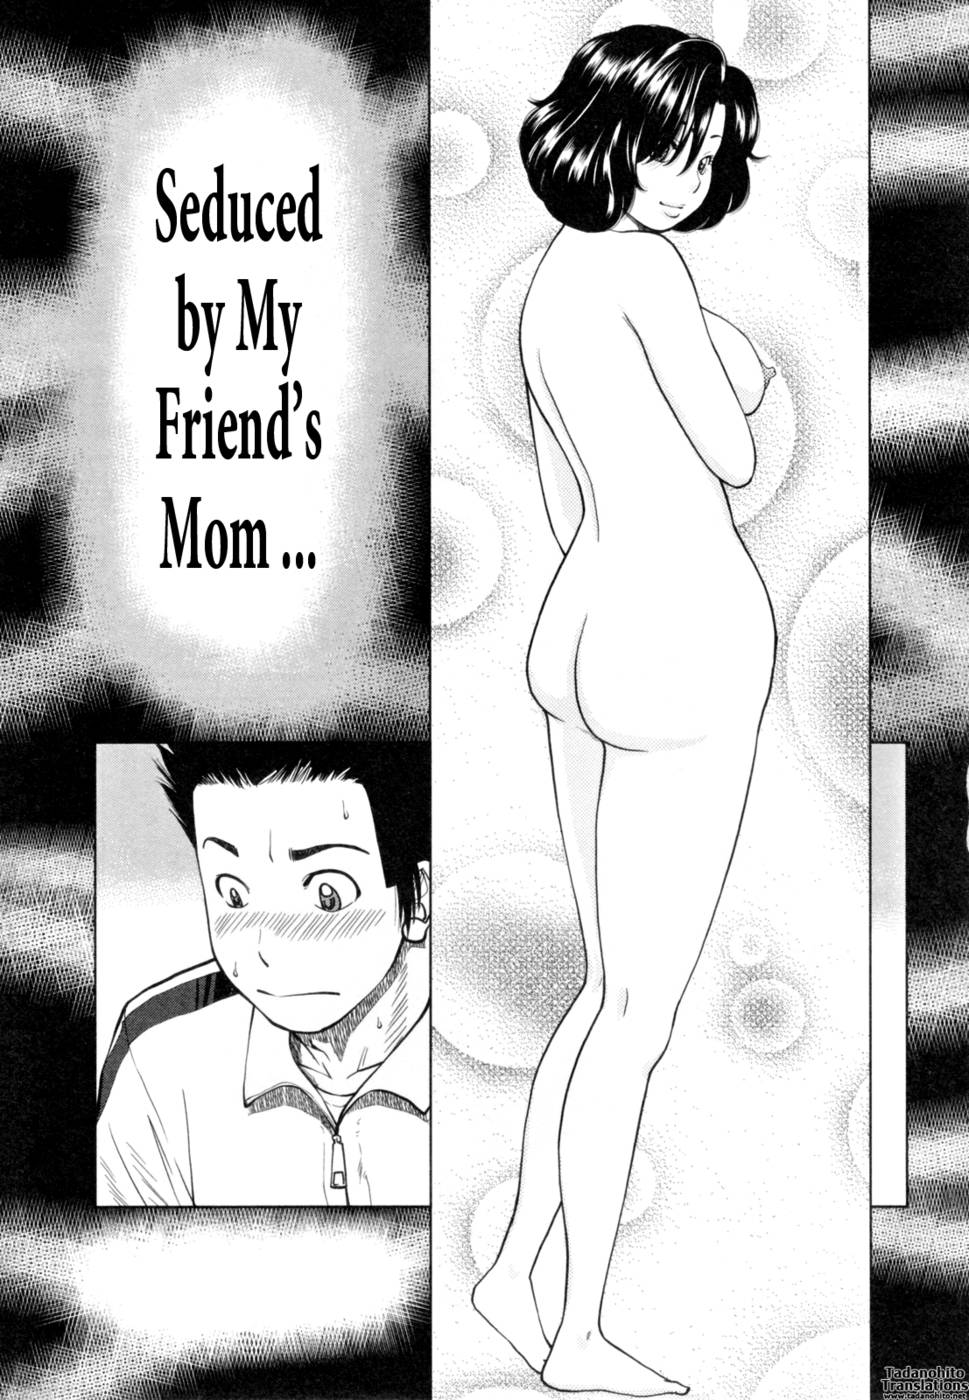 Chapter 8-Seduced By My Friends Mom - 32 Year Old Unsatisfied Wife image